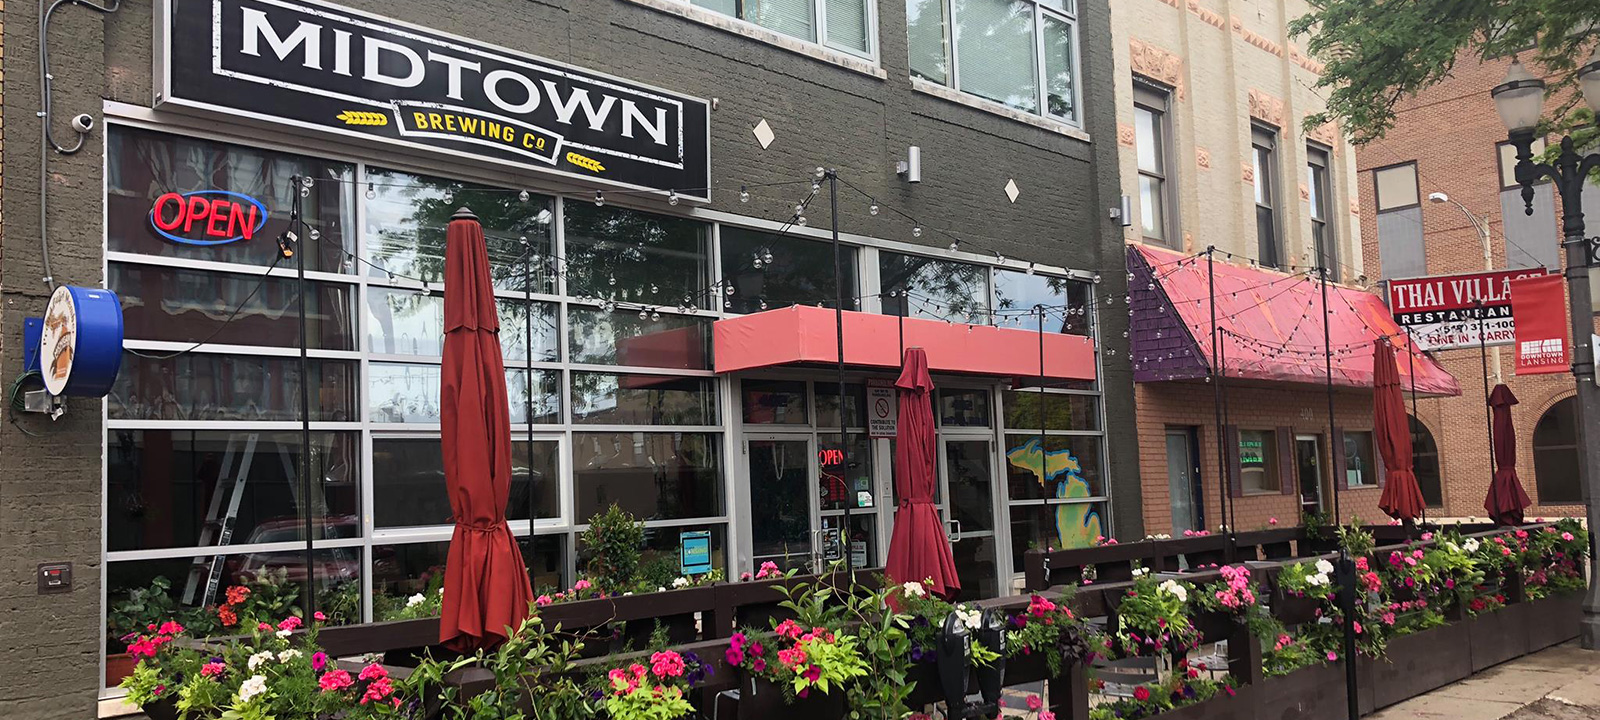 Midtown Brewing Company Storefront